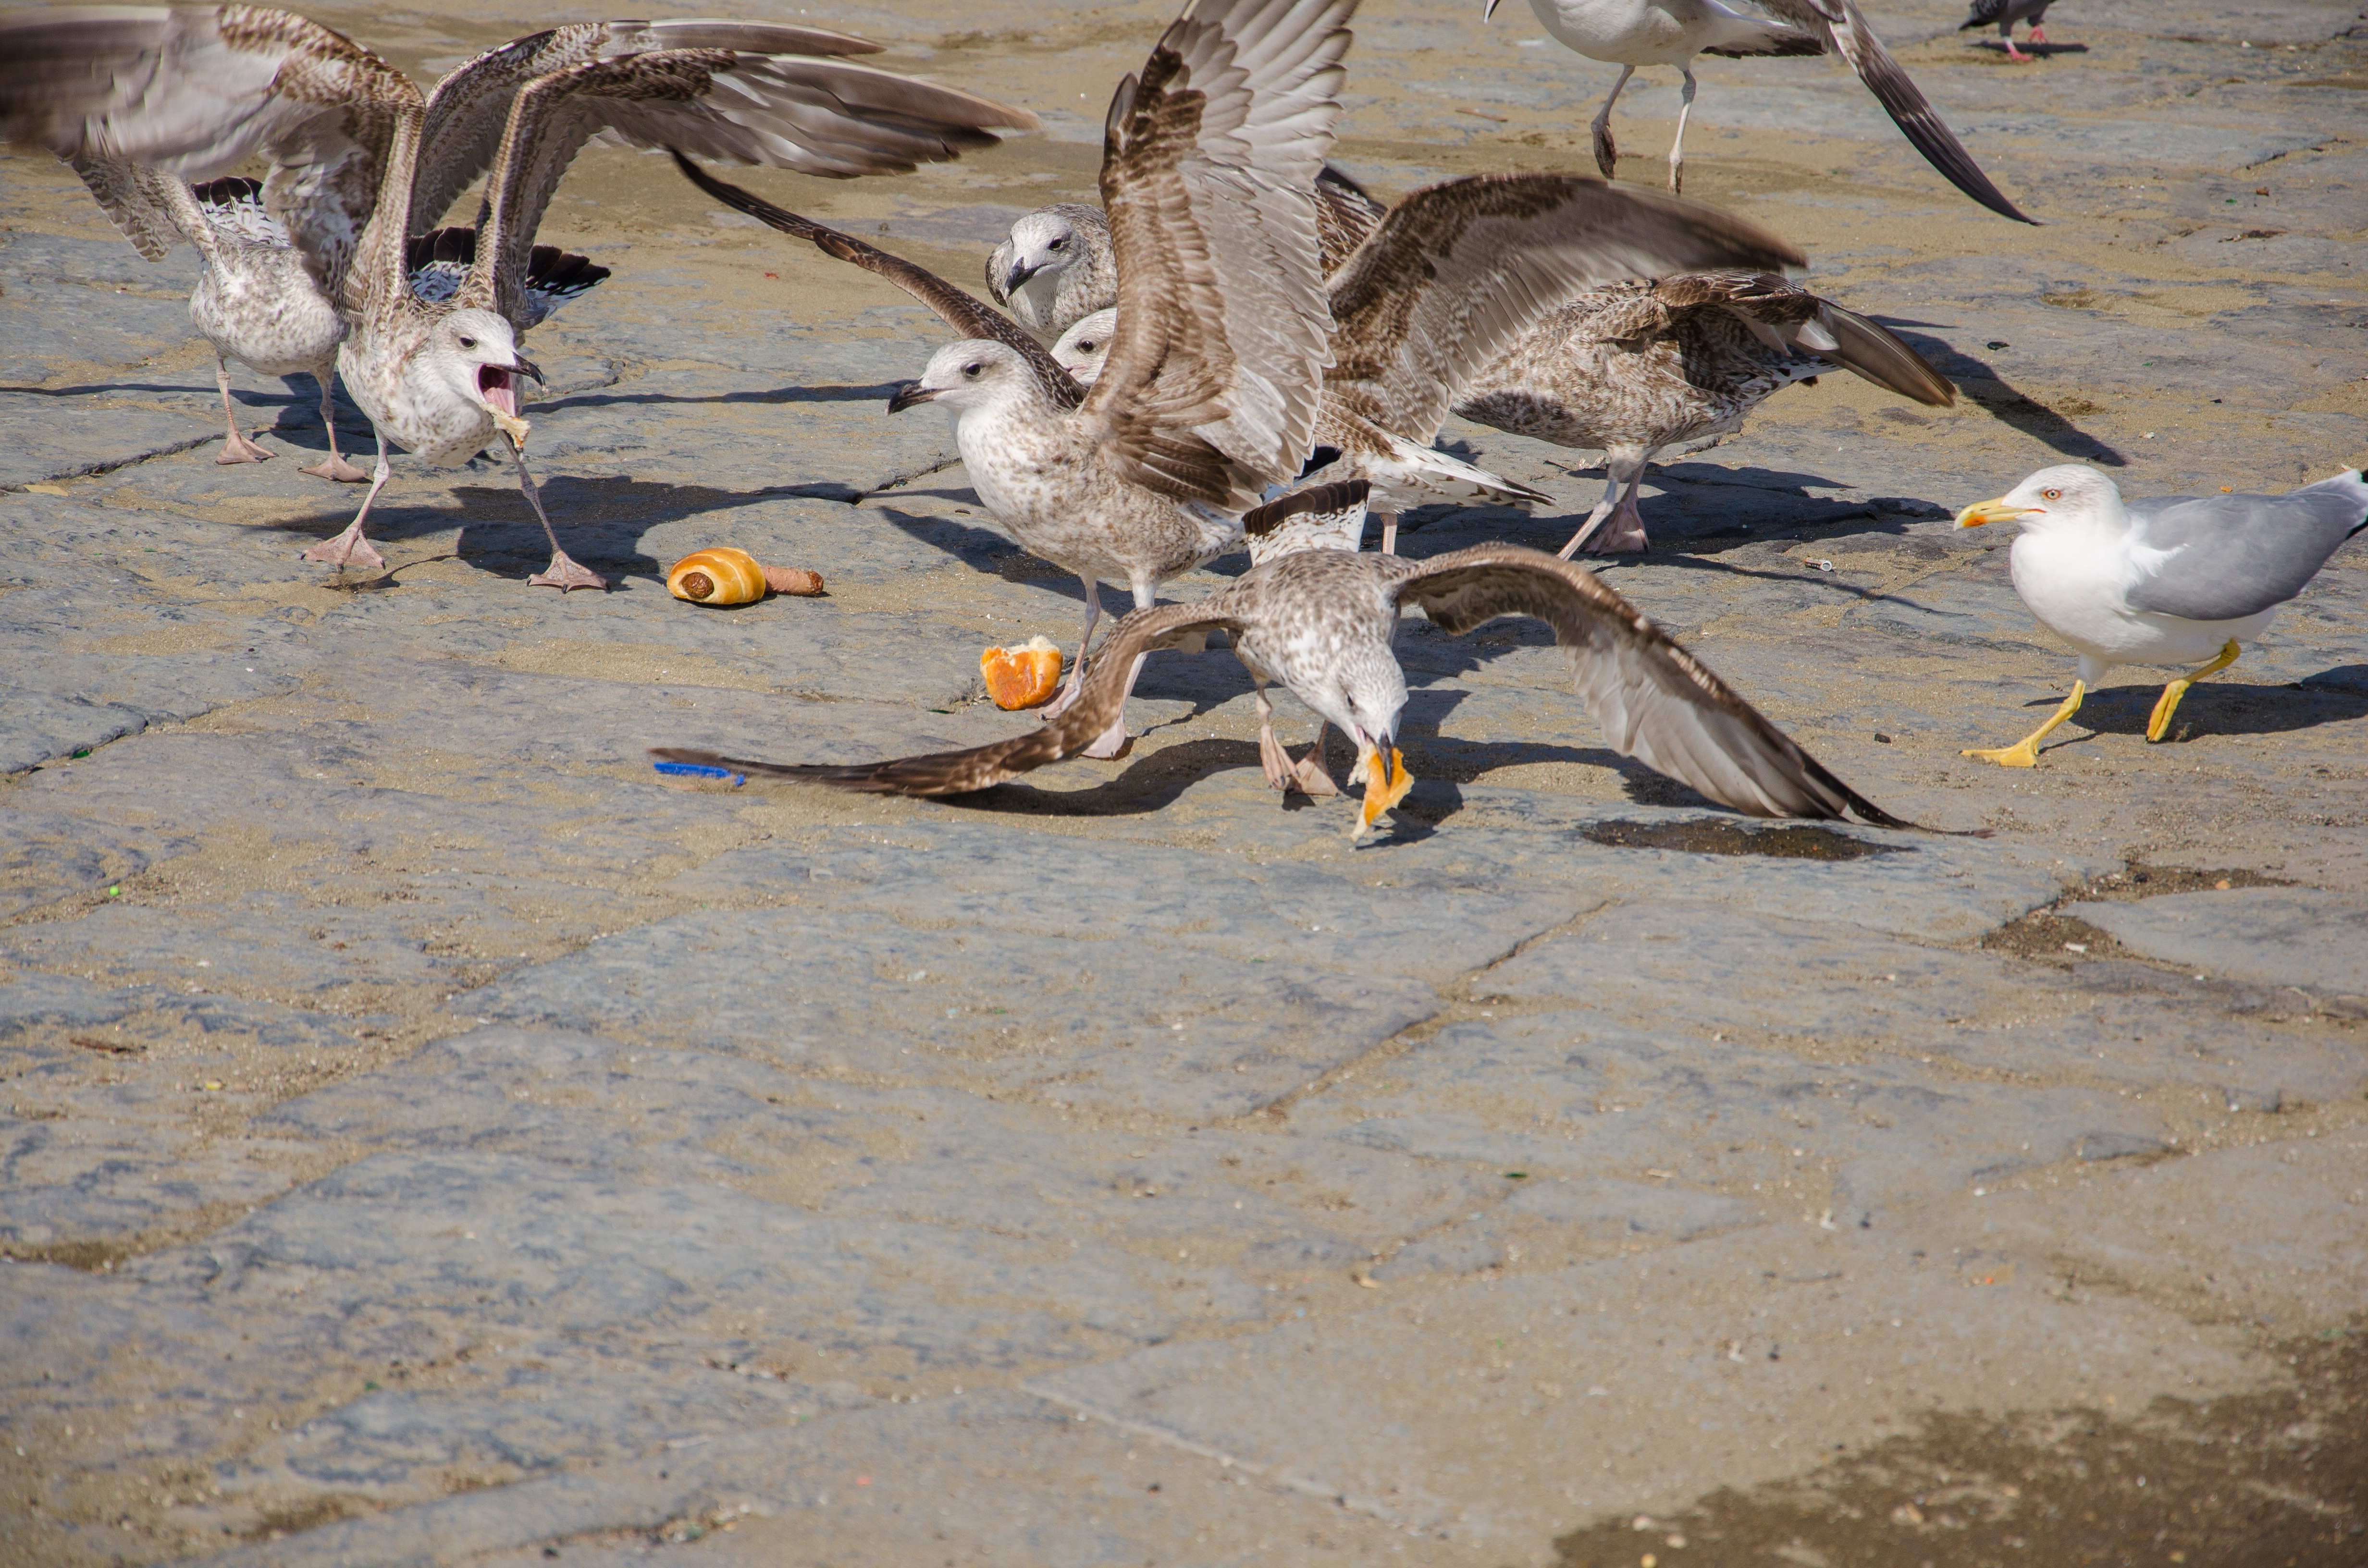 Seagulls fighting over and eating food. | Source: Shutterstock